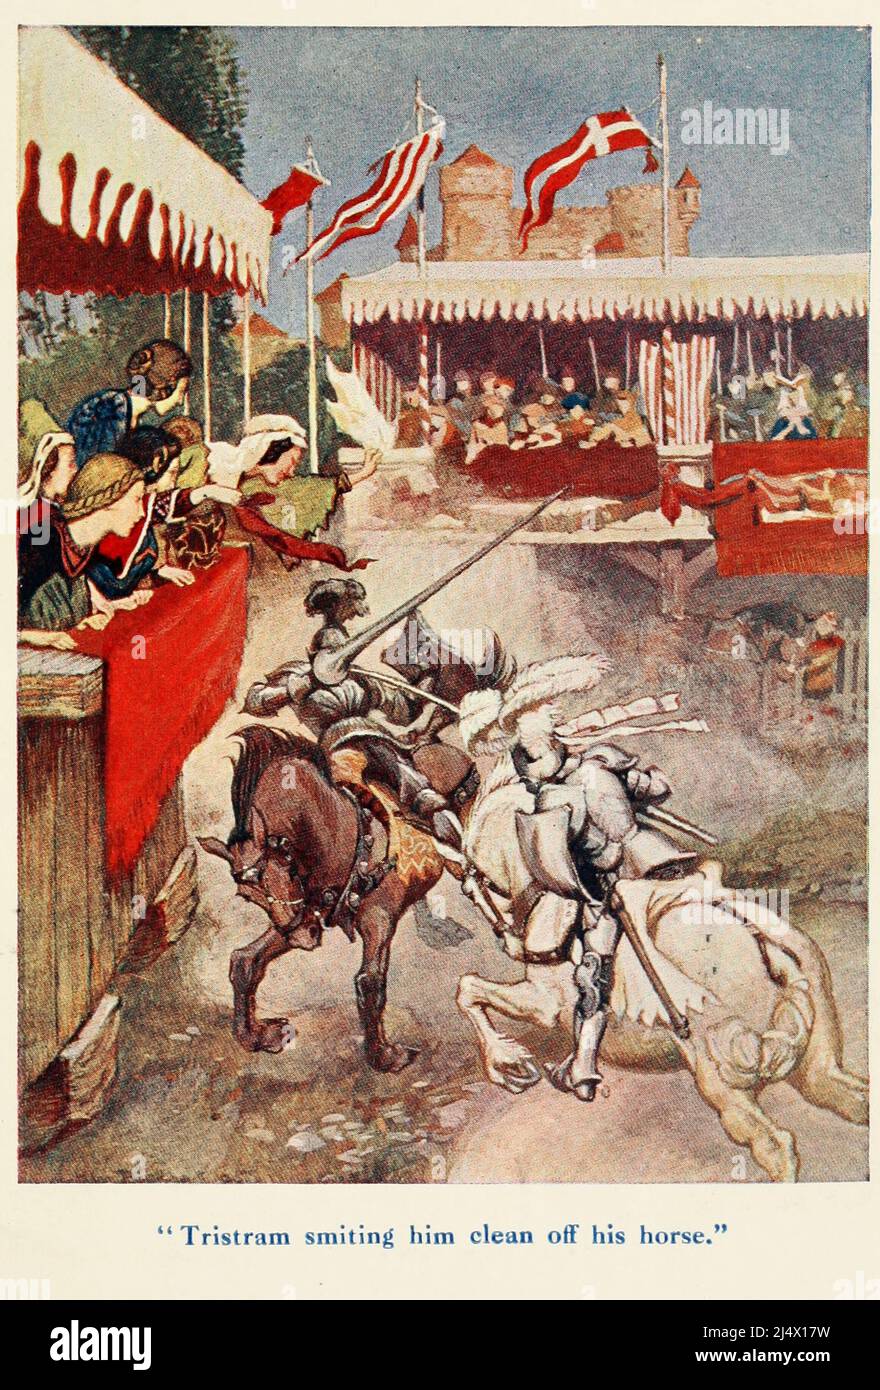 TRISTRAM SMITING HIM CLEAN OFF HIS HORSE from the book ' Stories of King Arthur ' by Arthur Lincoln Haydon, Illustrated by Arthur Rackham, Stock Photo